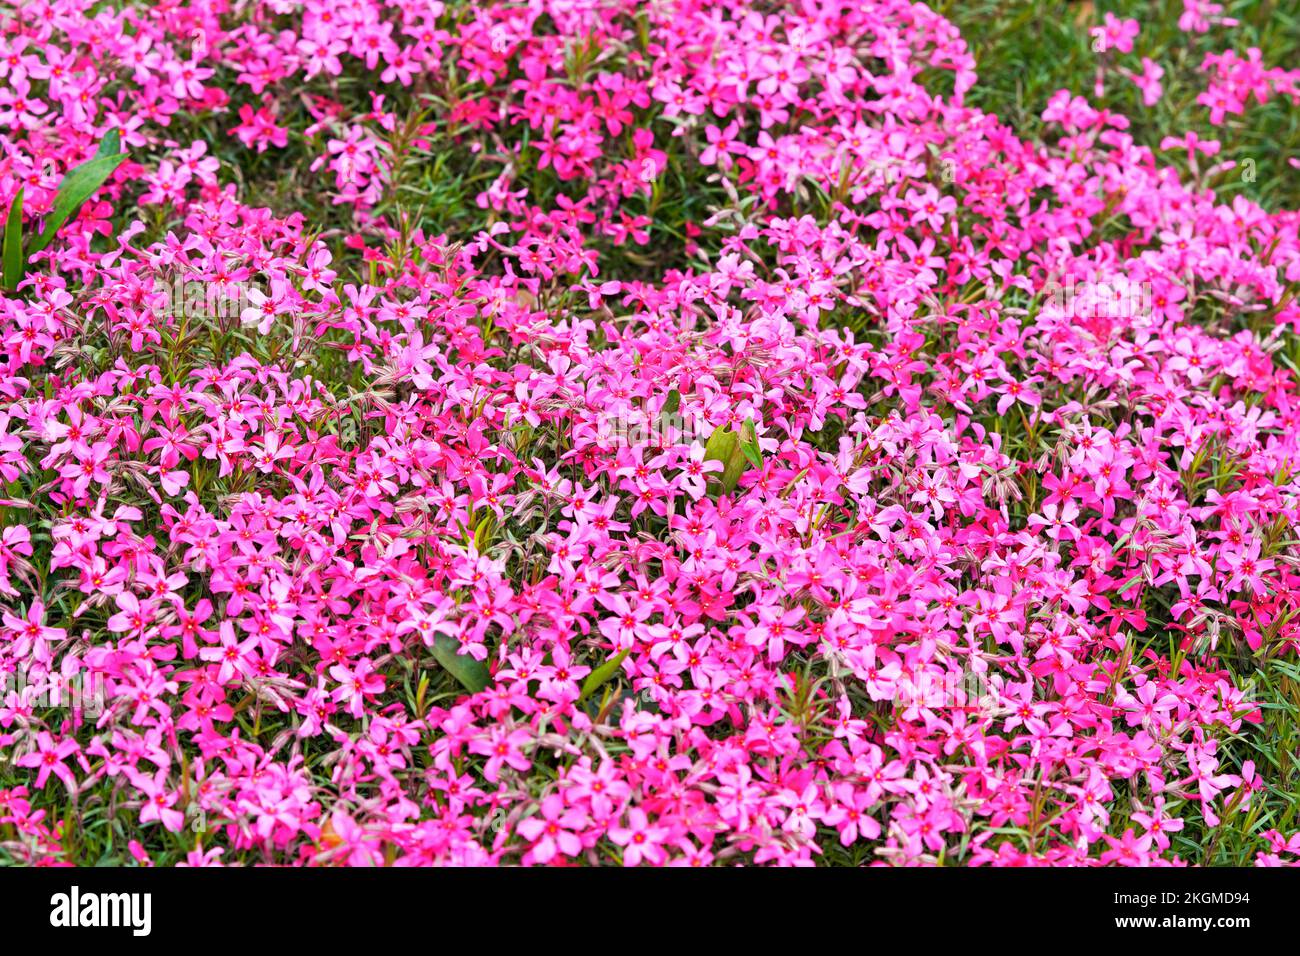 Upholstery phlox close-up. Flowering groundcover for the garden. Phlox subulata. Stock Photo